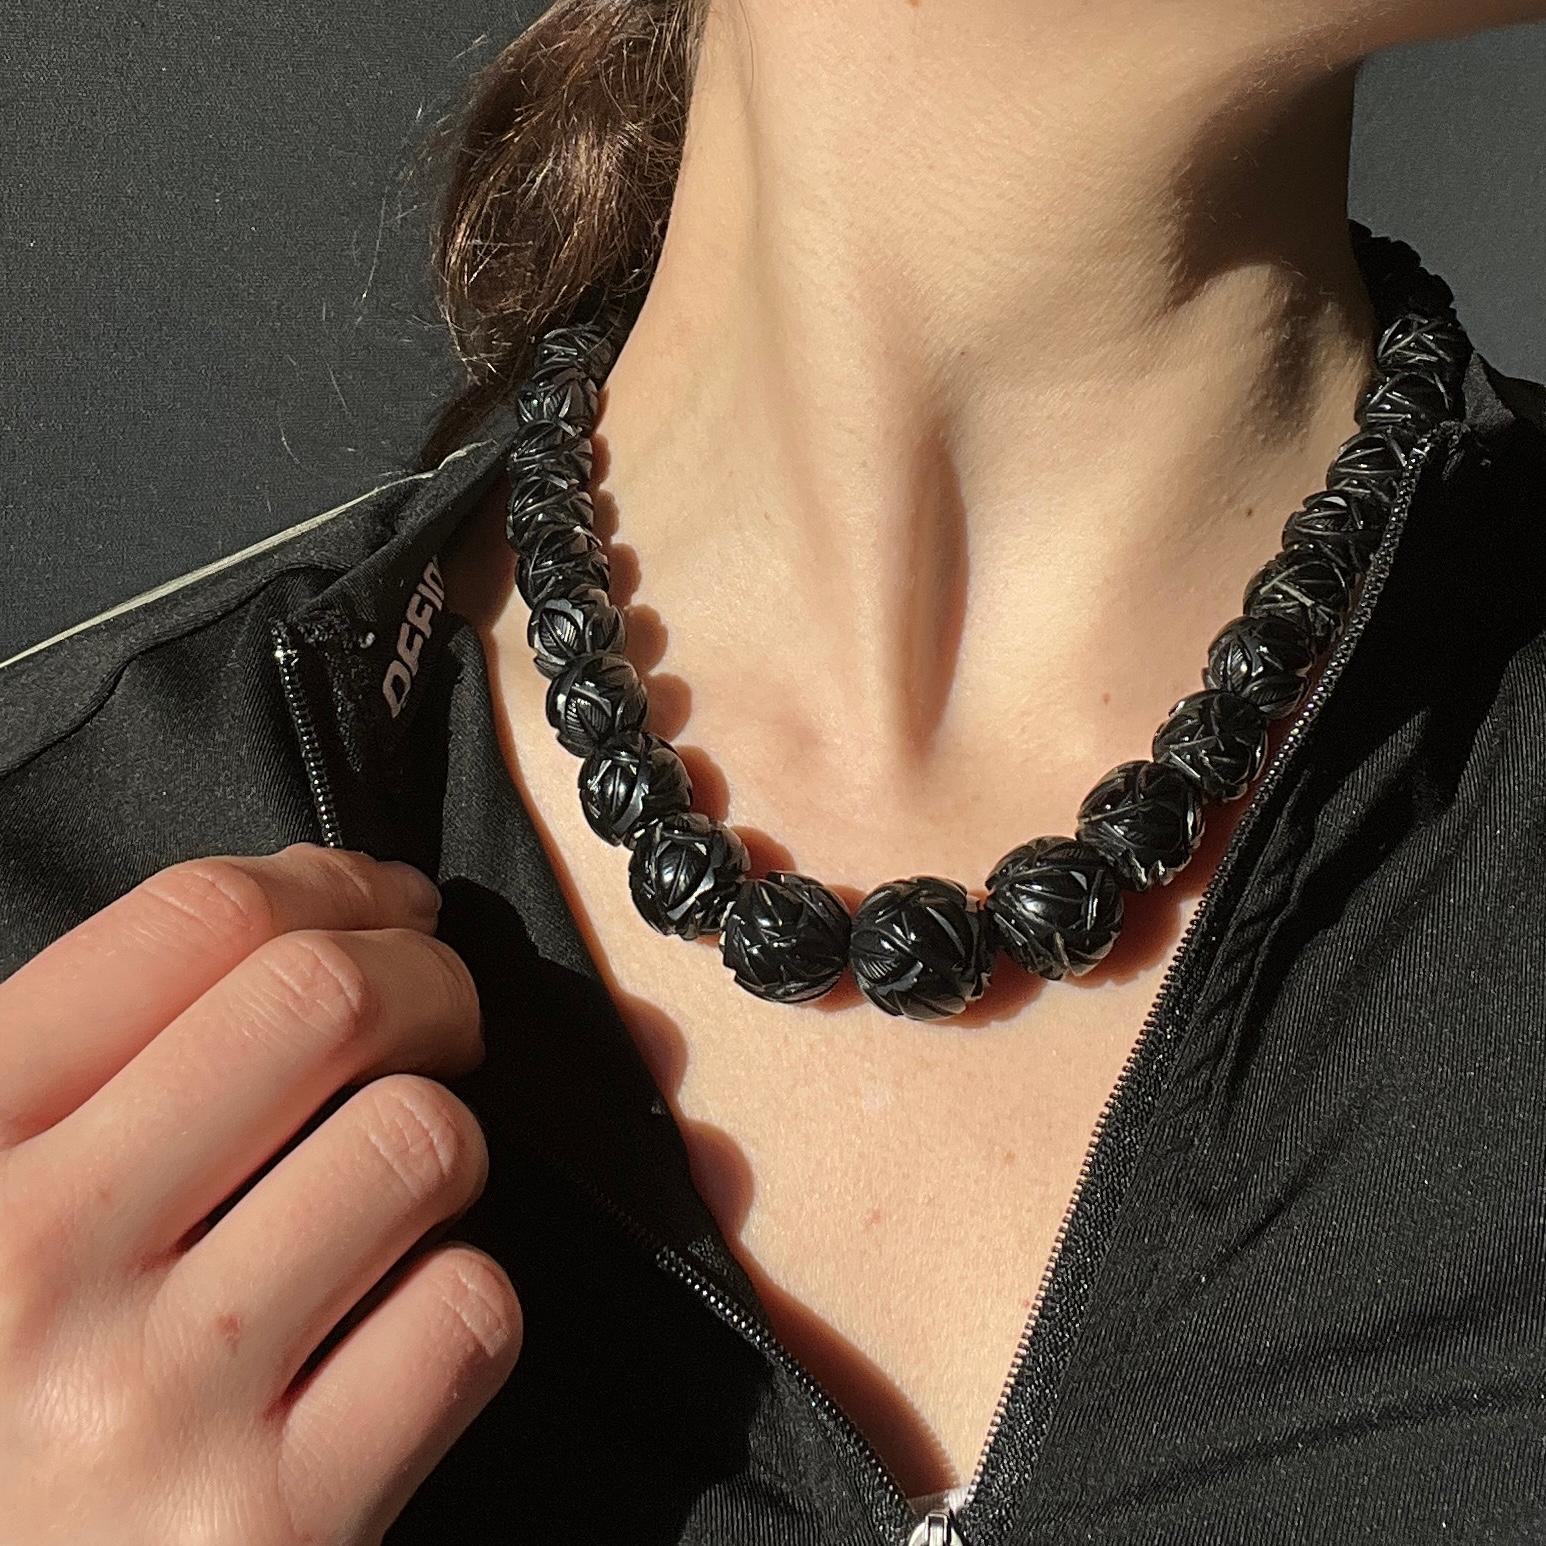 This stunning chunky necklace is held together by giant bolt clasp. The beads graduate in size, starting large at the centre and the smallest on the outer edges. 

Length: 44.5cm 
Largest Bead Diameter: 17mm
Smallest Bead Diameter: 10.5mm 

Weight: